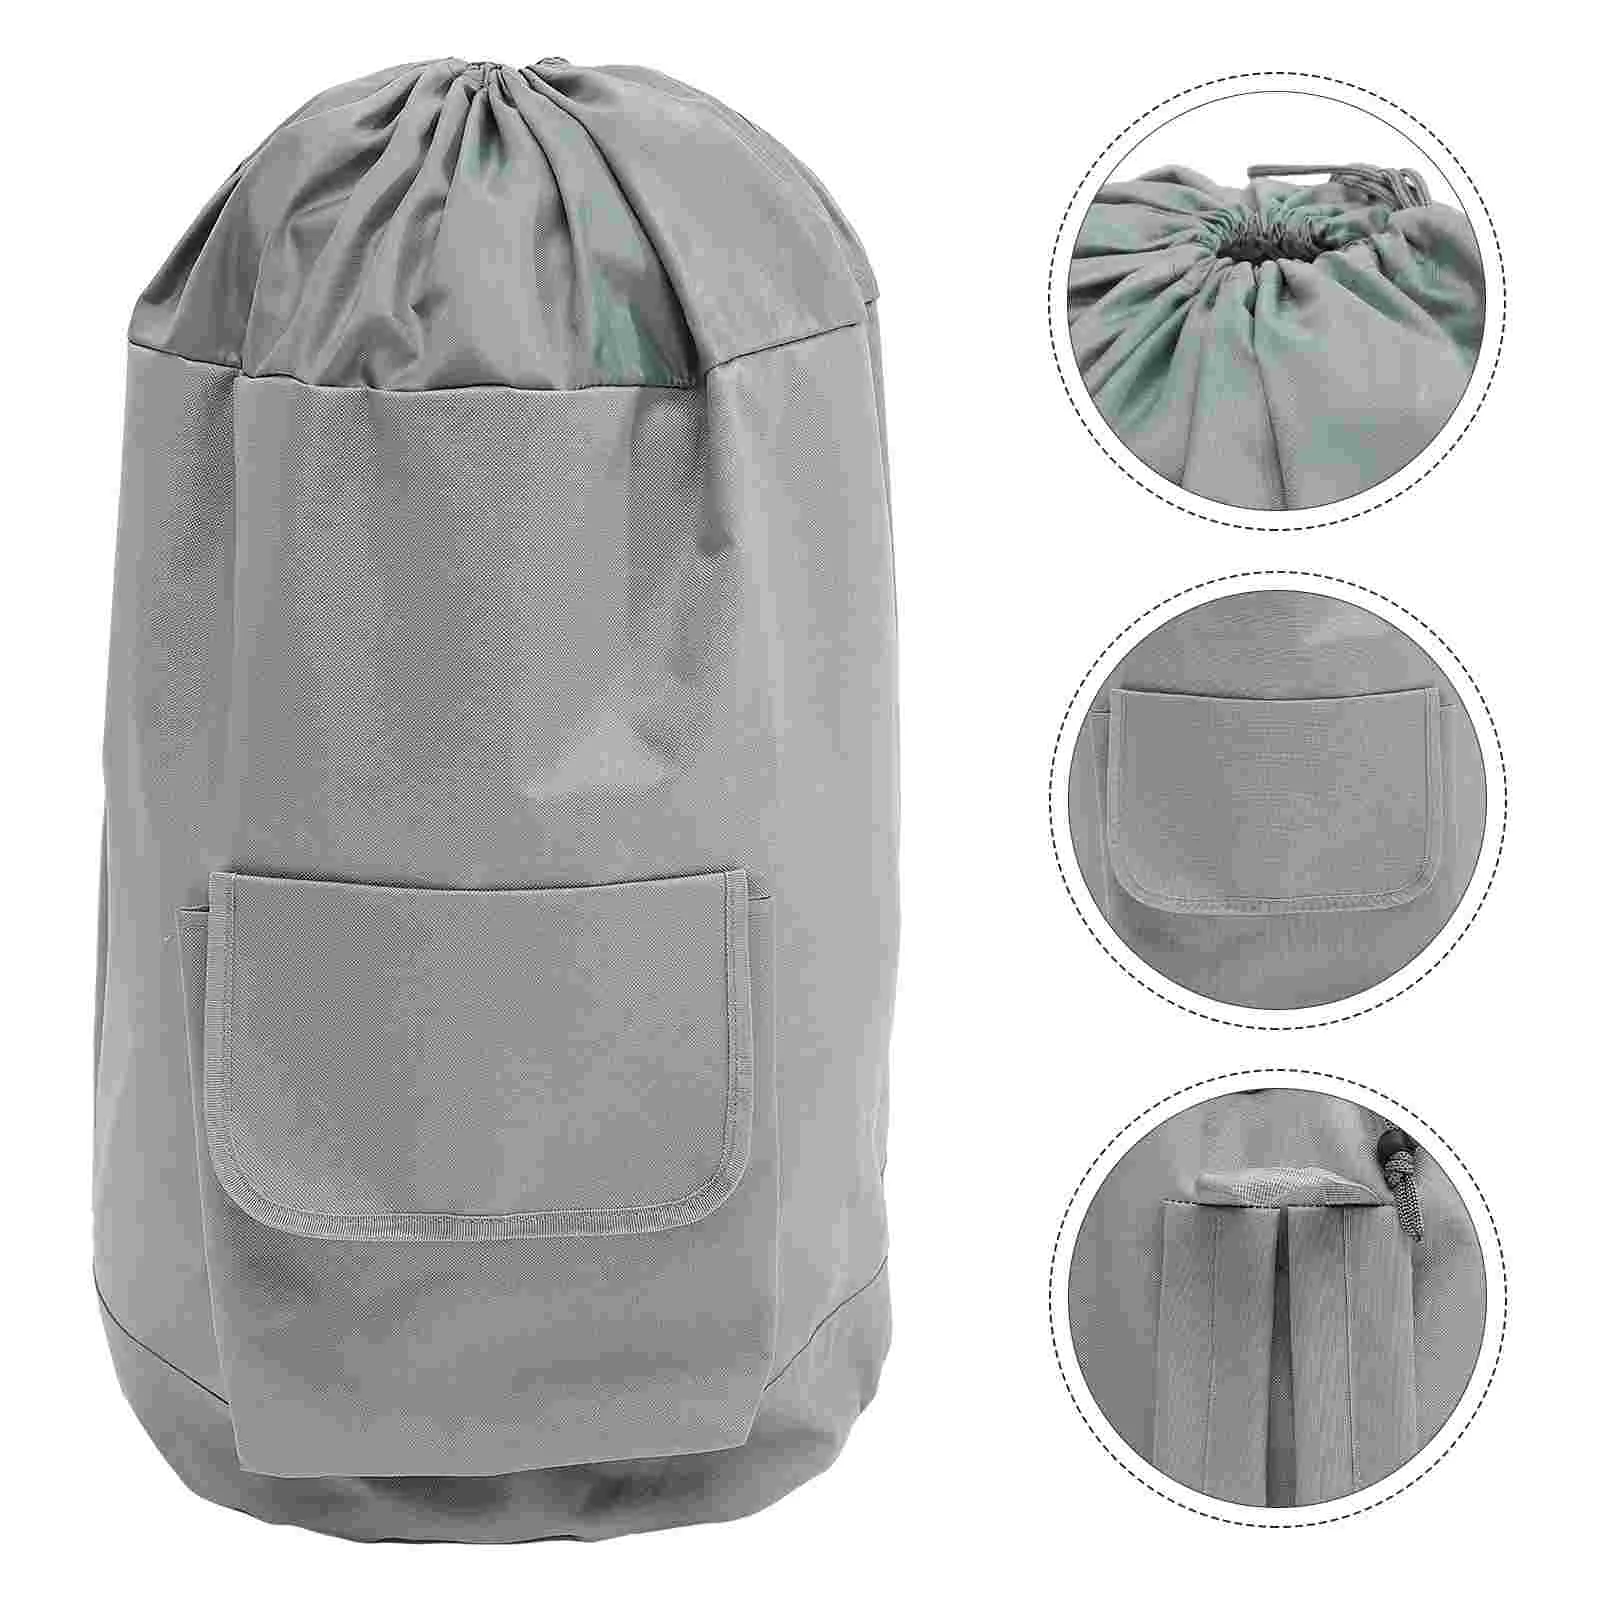 

Laundry Clothes Storage Pouch Travel Dirty Hamper Dorm Room Backpack Drawstring Guys Essentials Basket Organizers Storage bag